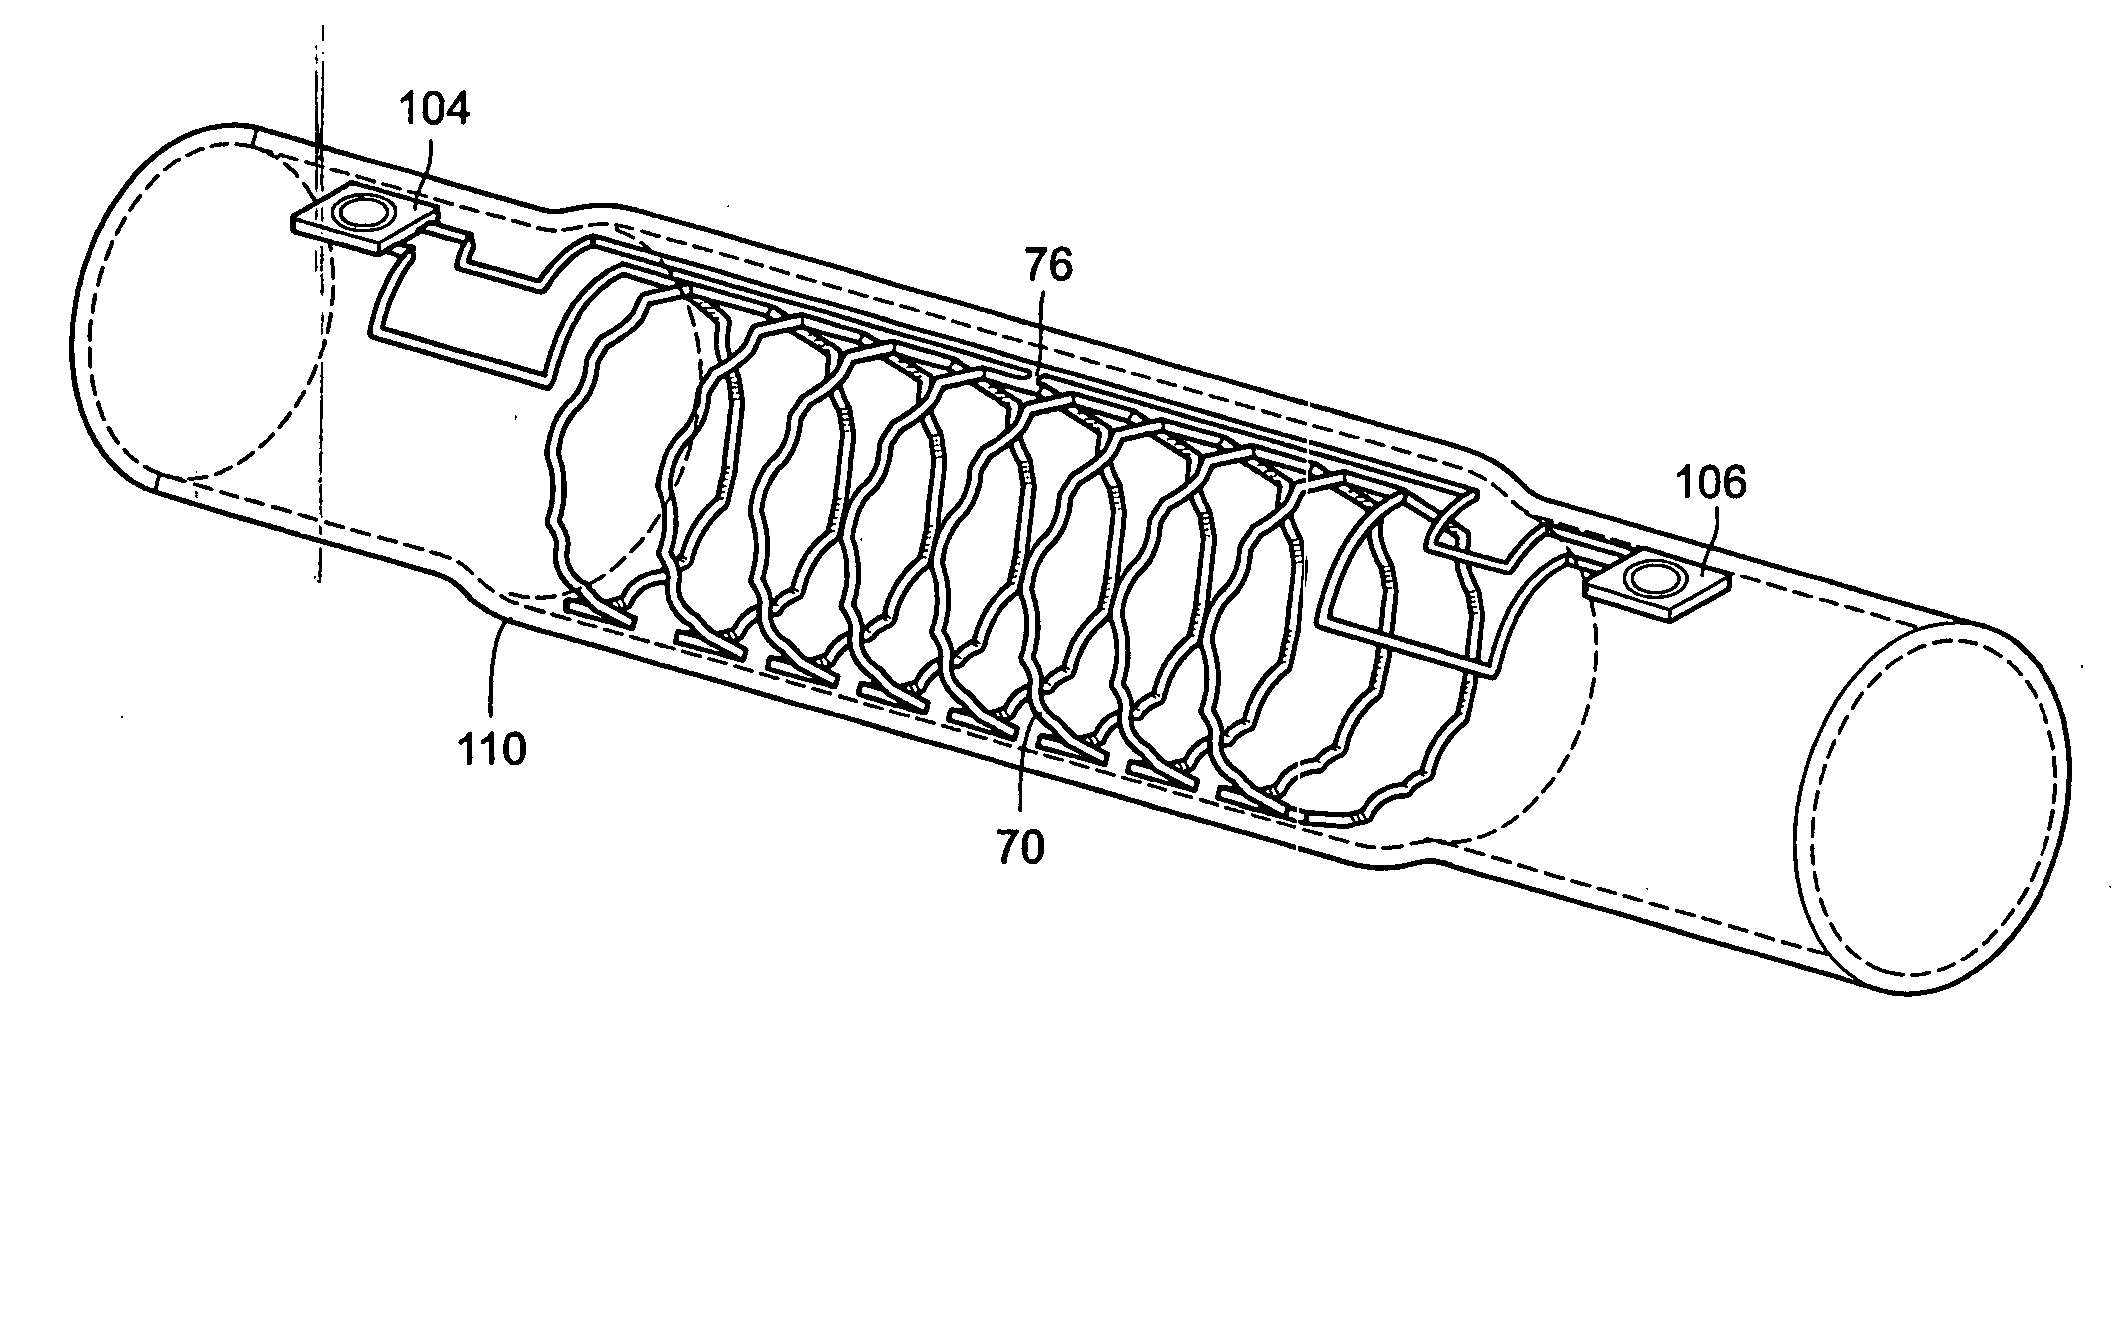 Antenna stent device for wireless, intraluminal monitoring